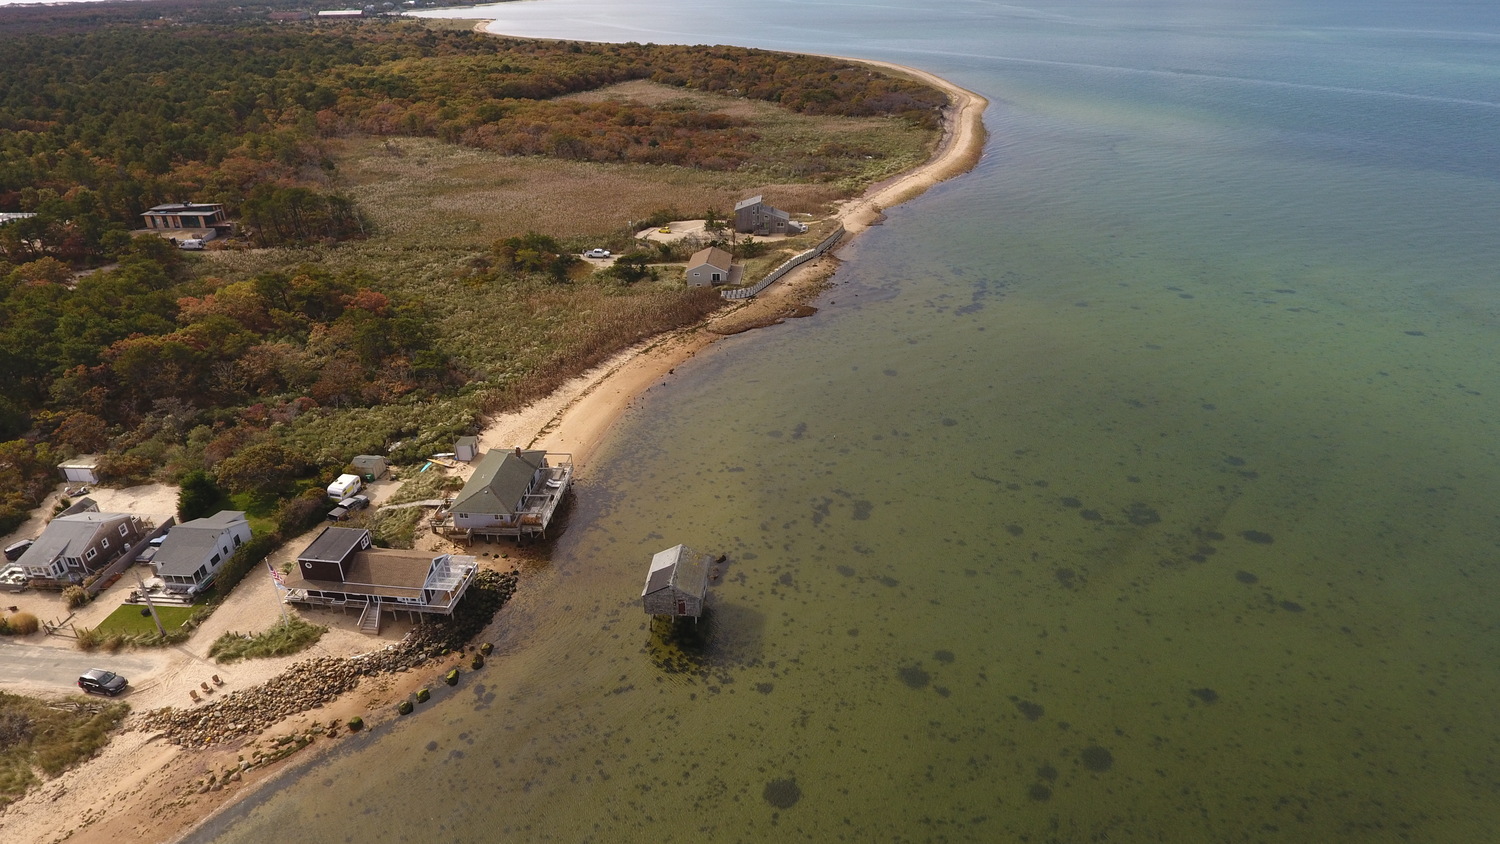 The owners of a house in Lazy Point have sued the East Hampton Town Zoning Board of Appeals seeking to compel them to grant the property permission for a permanent sea wall to halt erosion at the property in an area where other houses have been lost to the sea as the shoreline has retreated. 
MICHAEL WRIGHT